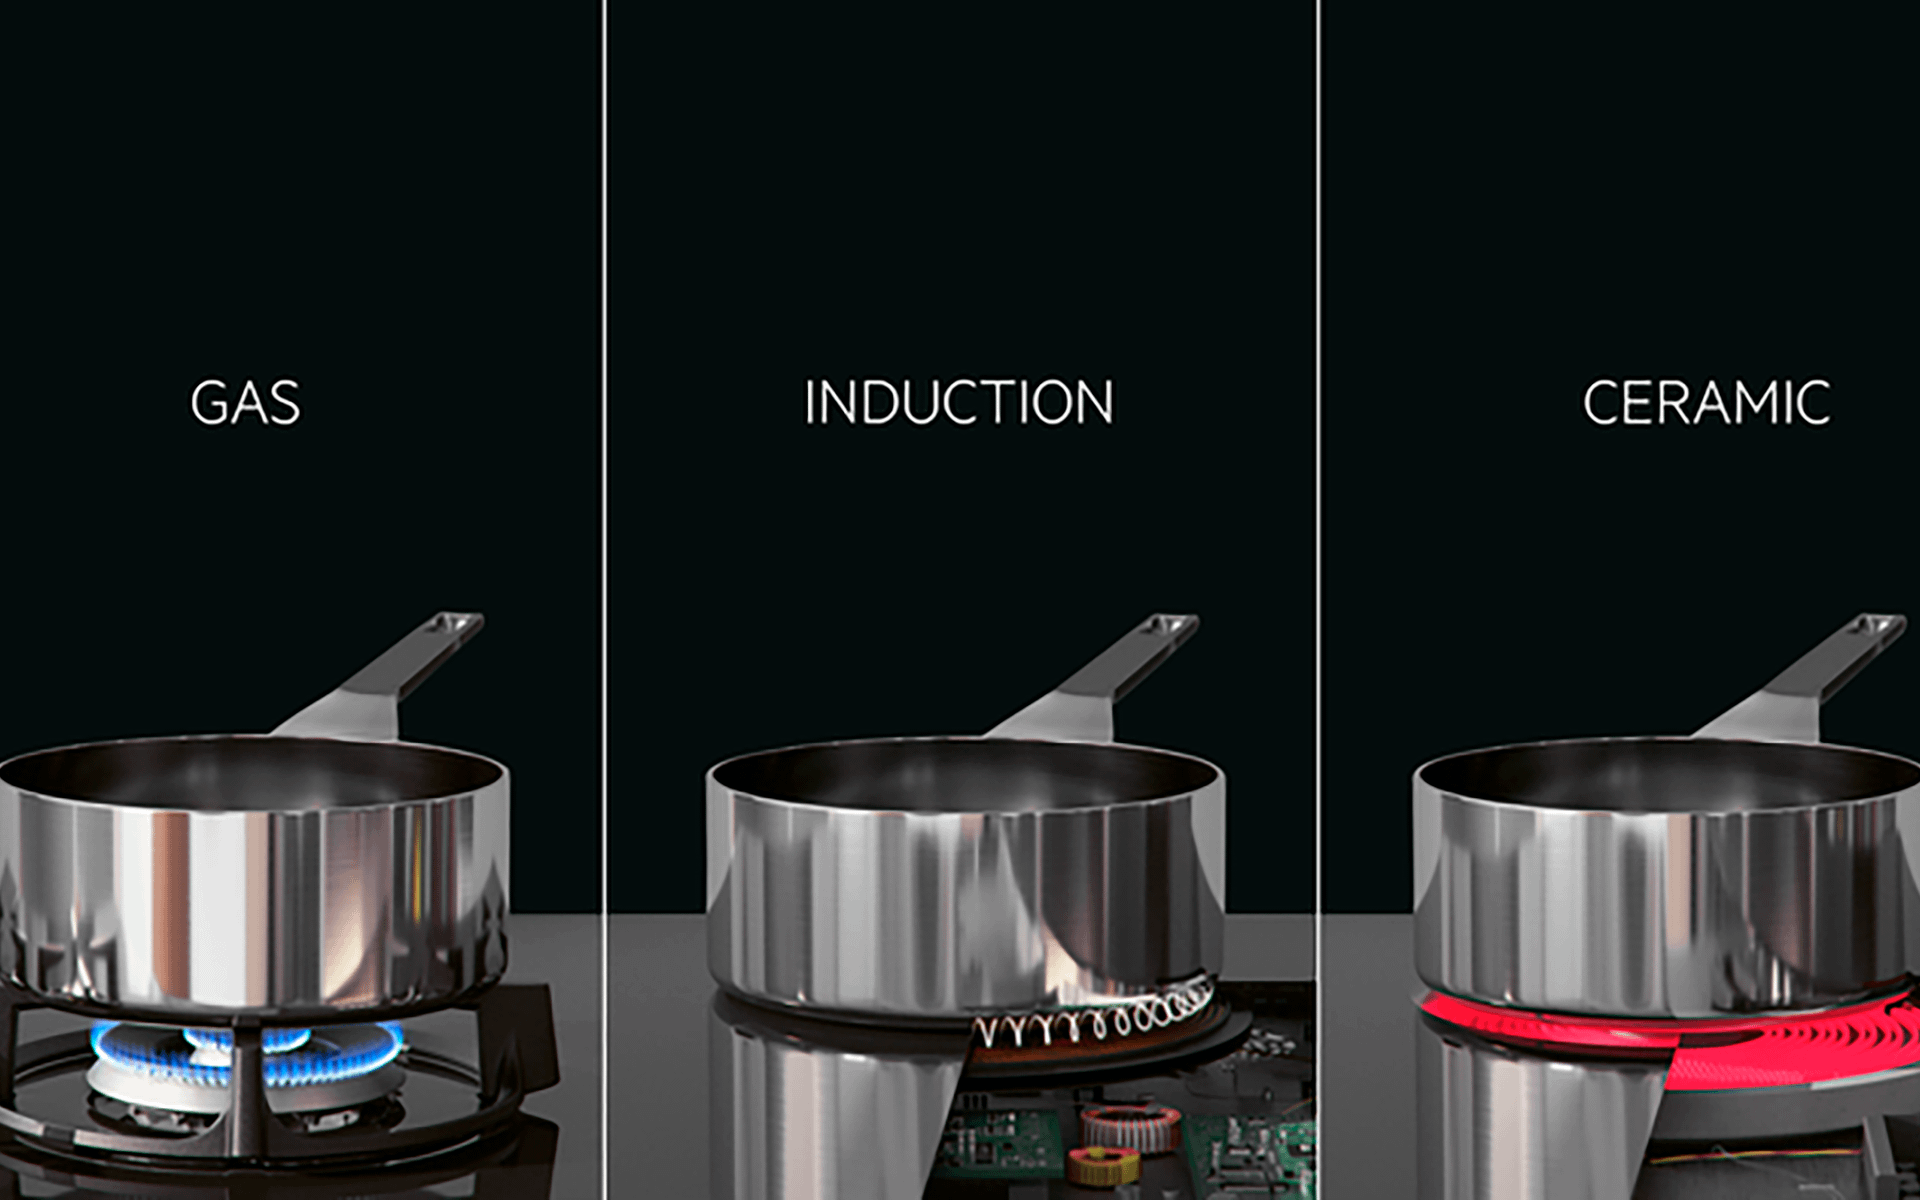 Image showing different types of hobs: Gas, induction and ceramic